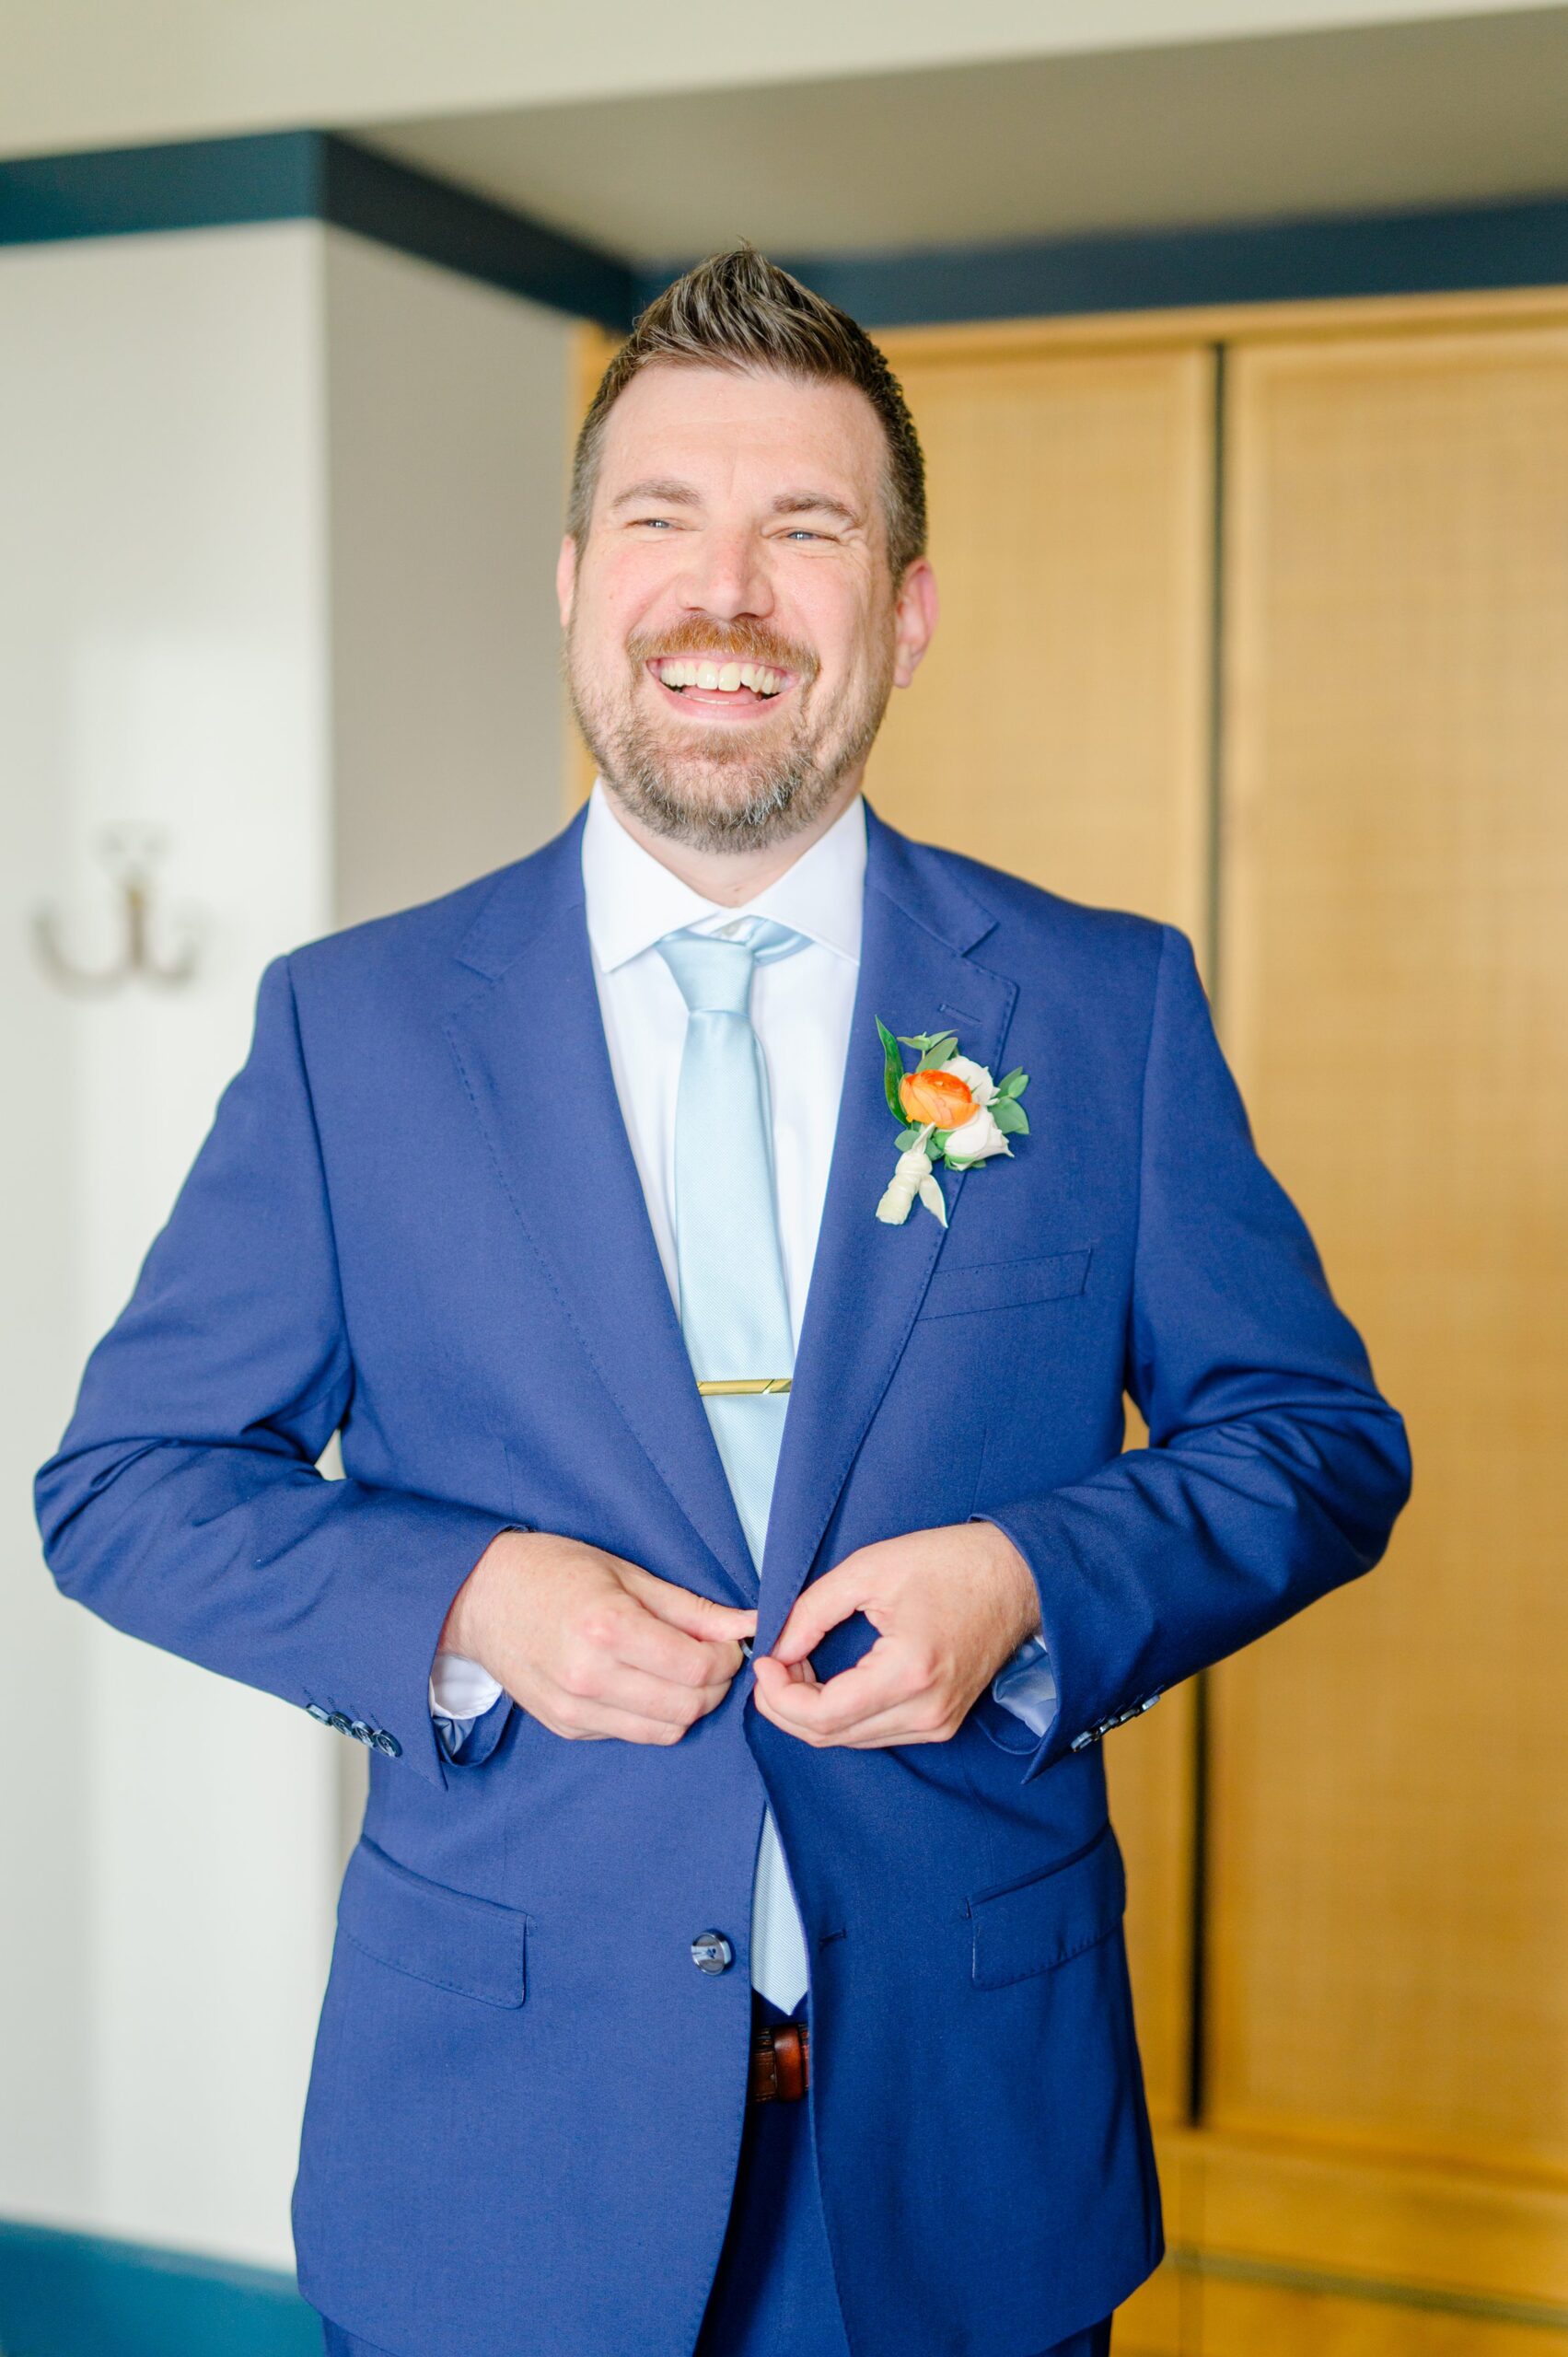 Vibrant Spring wedding day at The Loom Baltimore in Maryland photographed by Baltimore Wedding Photographer Cait Kramer Photography